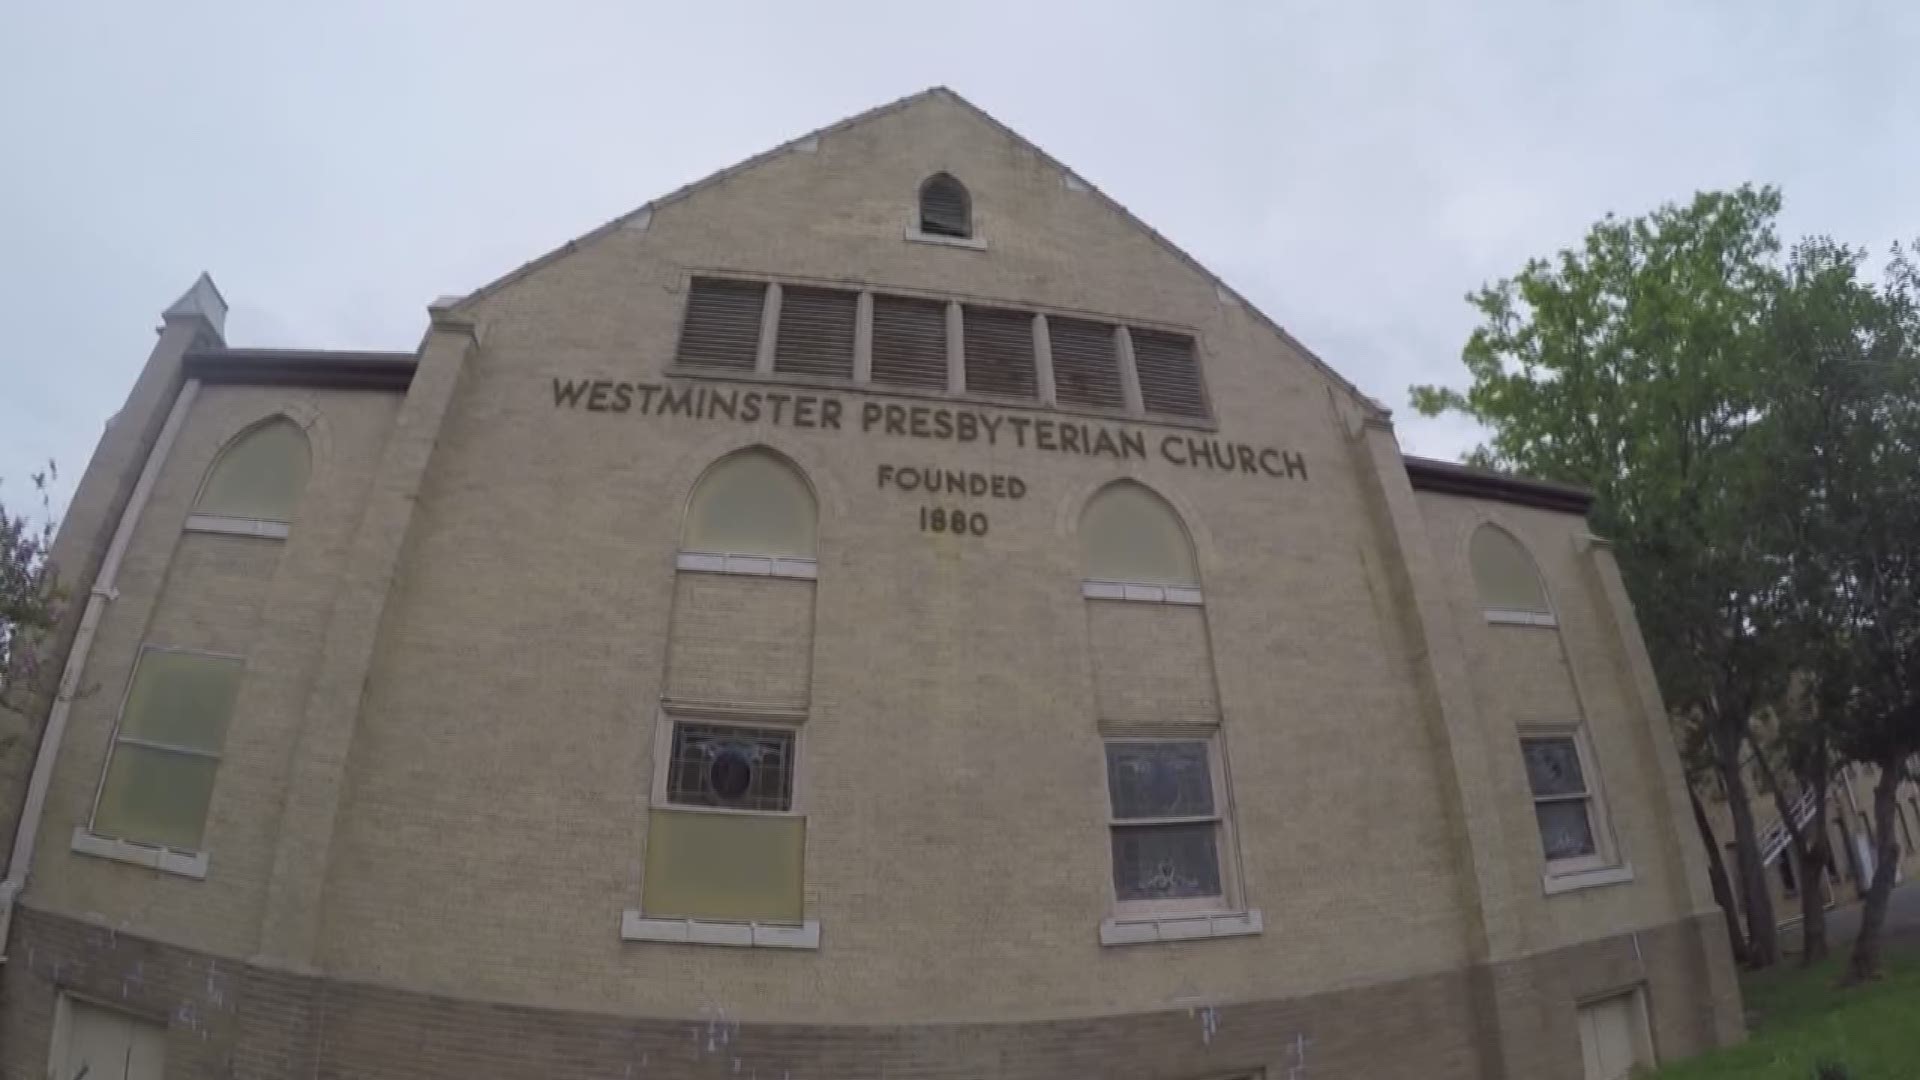 A Beaumont pastor is renovating Westminster Presbyterian Church in Downtown Beaumont 